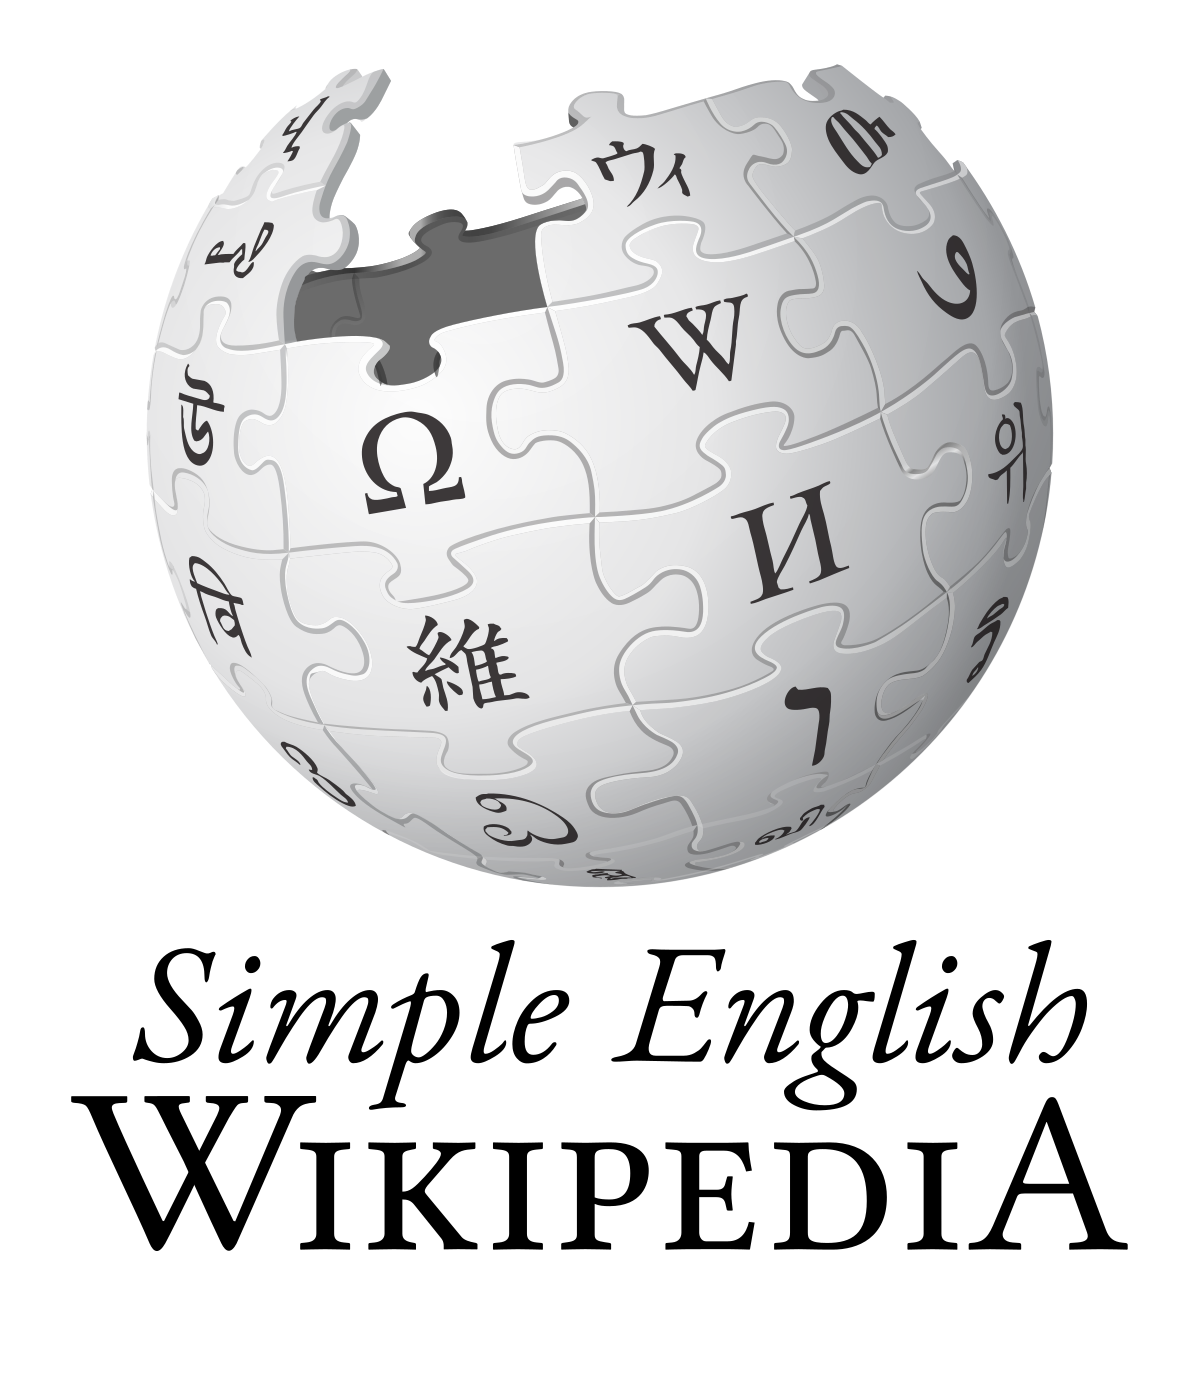 Transparency (graphic) - Wikipedia